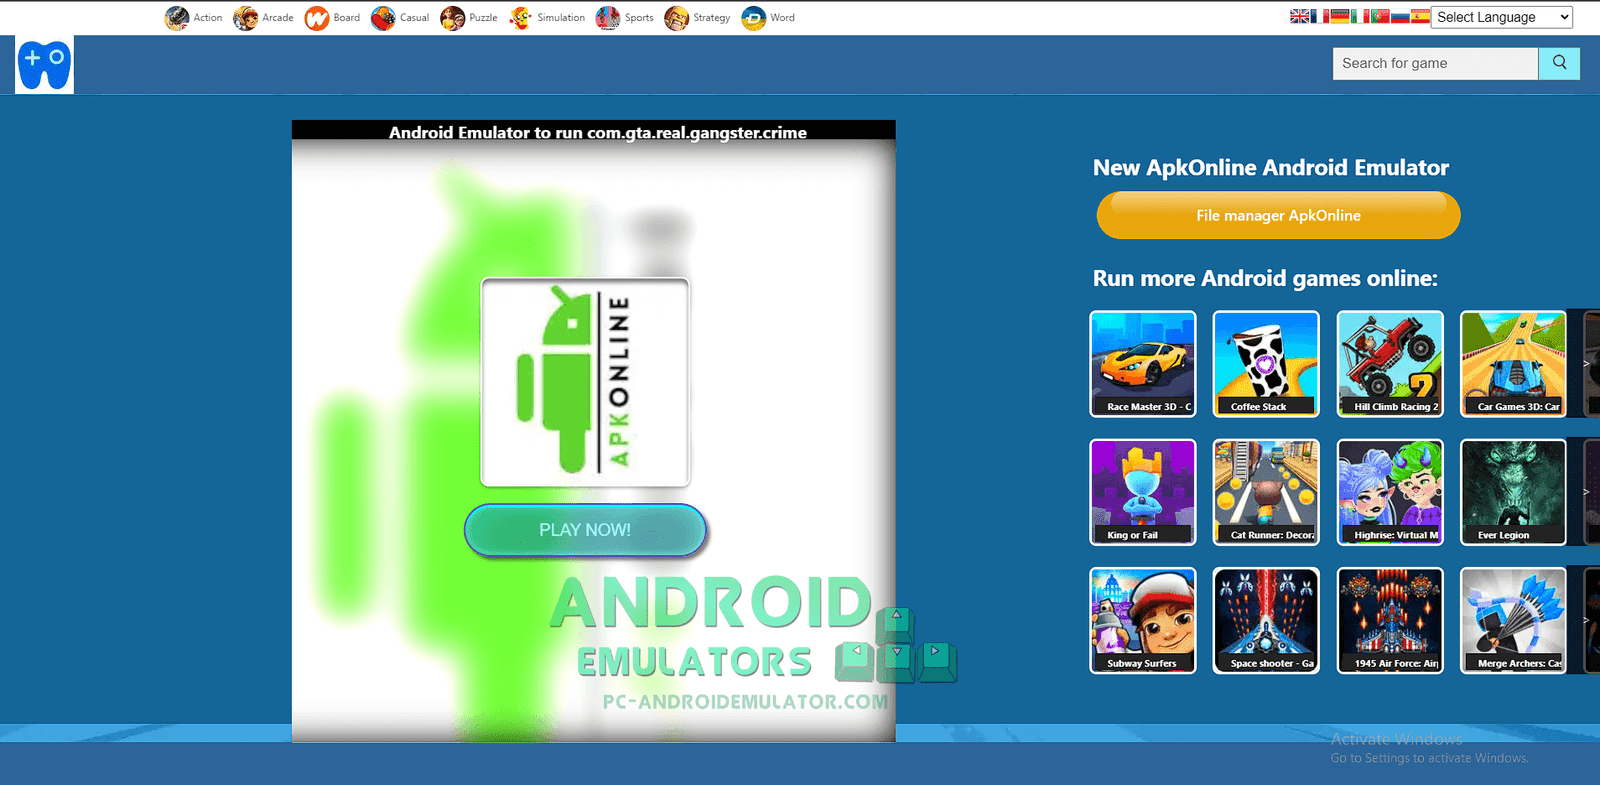 How to Run APK Online in a Browser